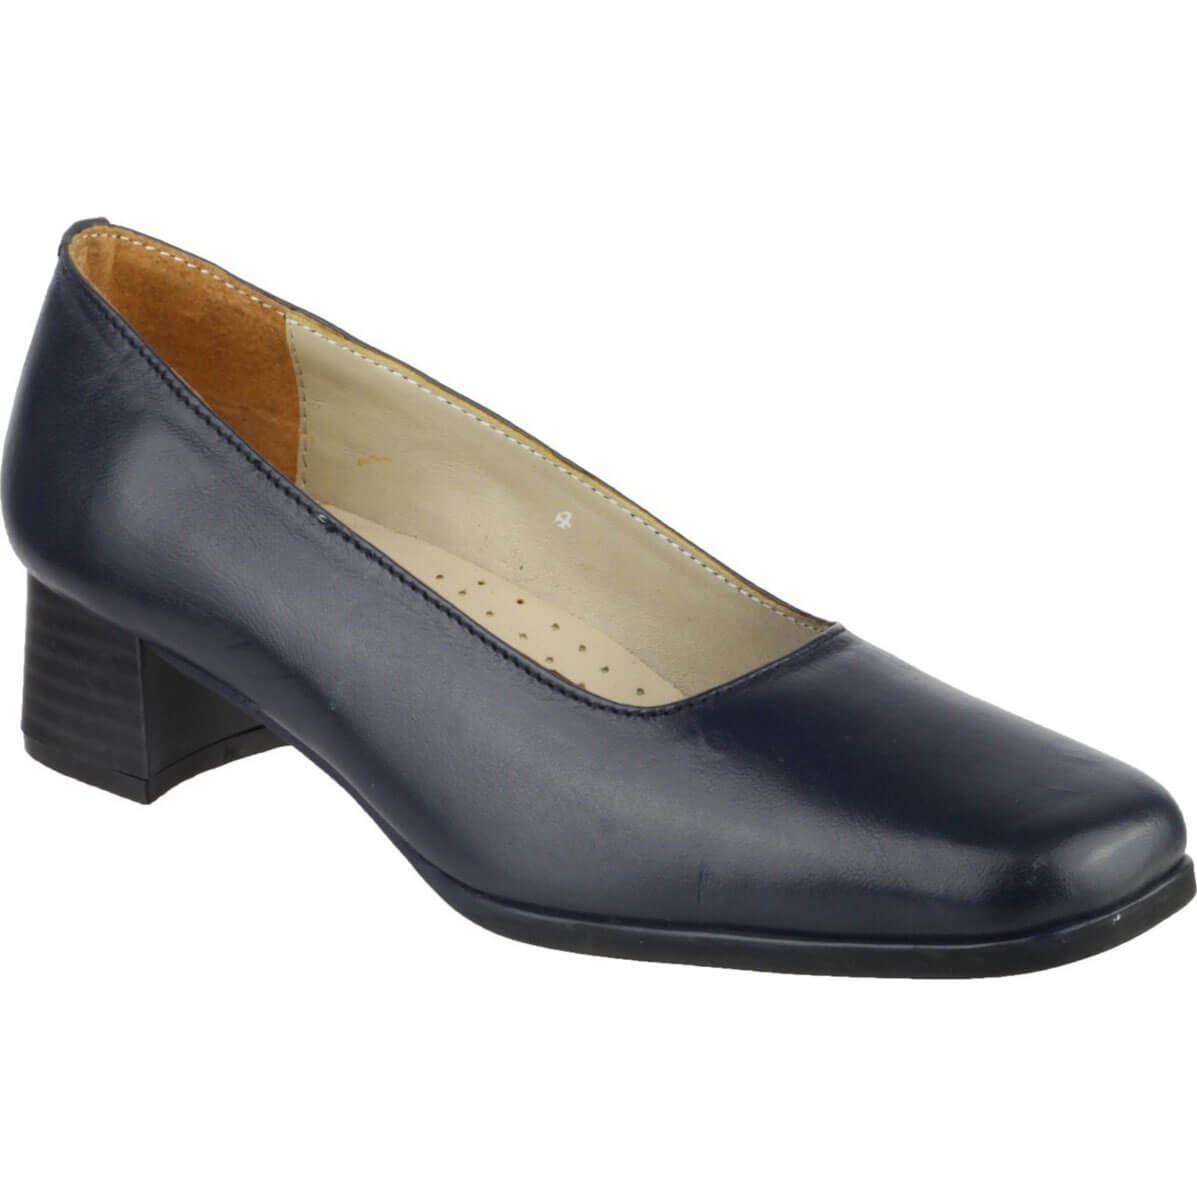 Image of Amblers Walford Ladies Shoes Leather Court Navy Size 3.5